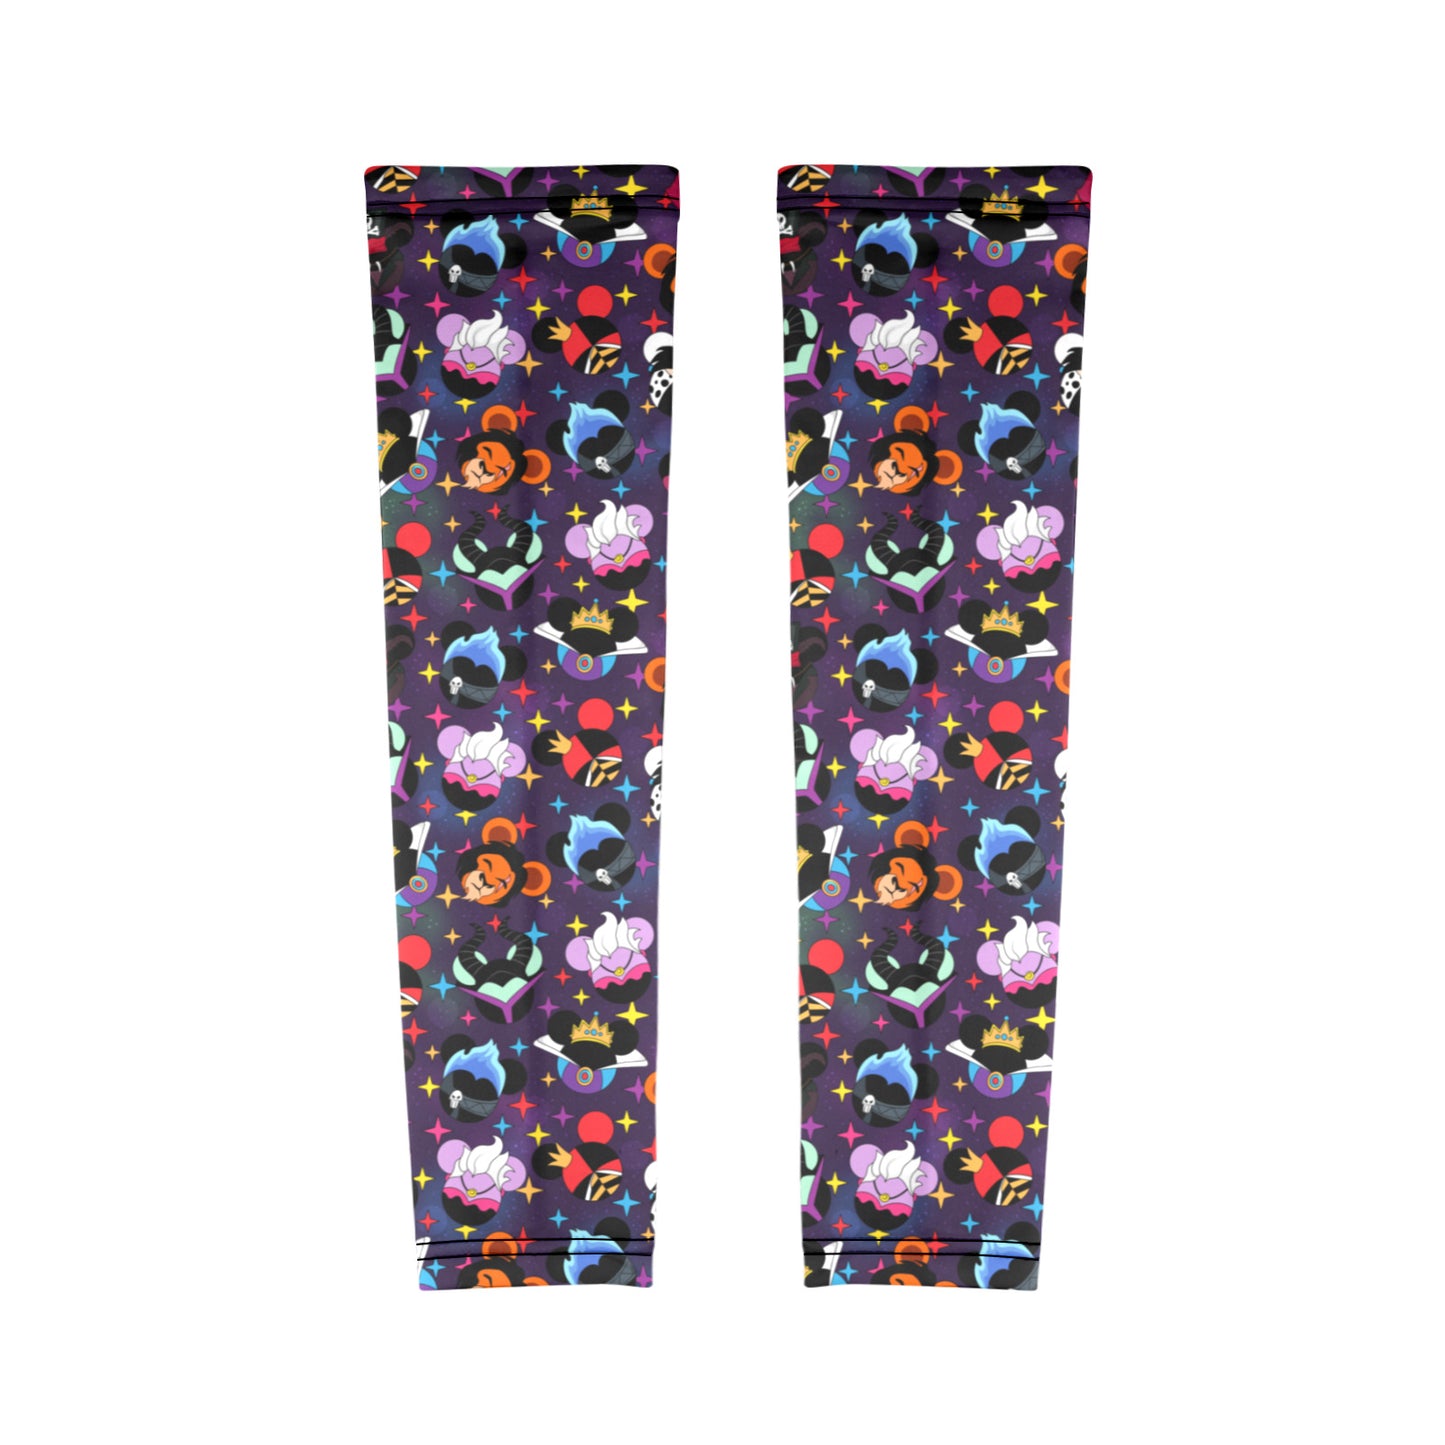 Villains Arm Sleeves (Set of Two)